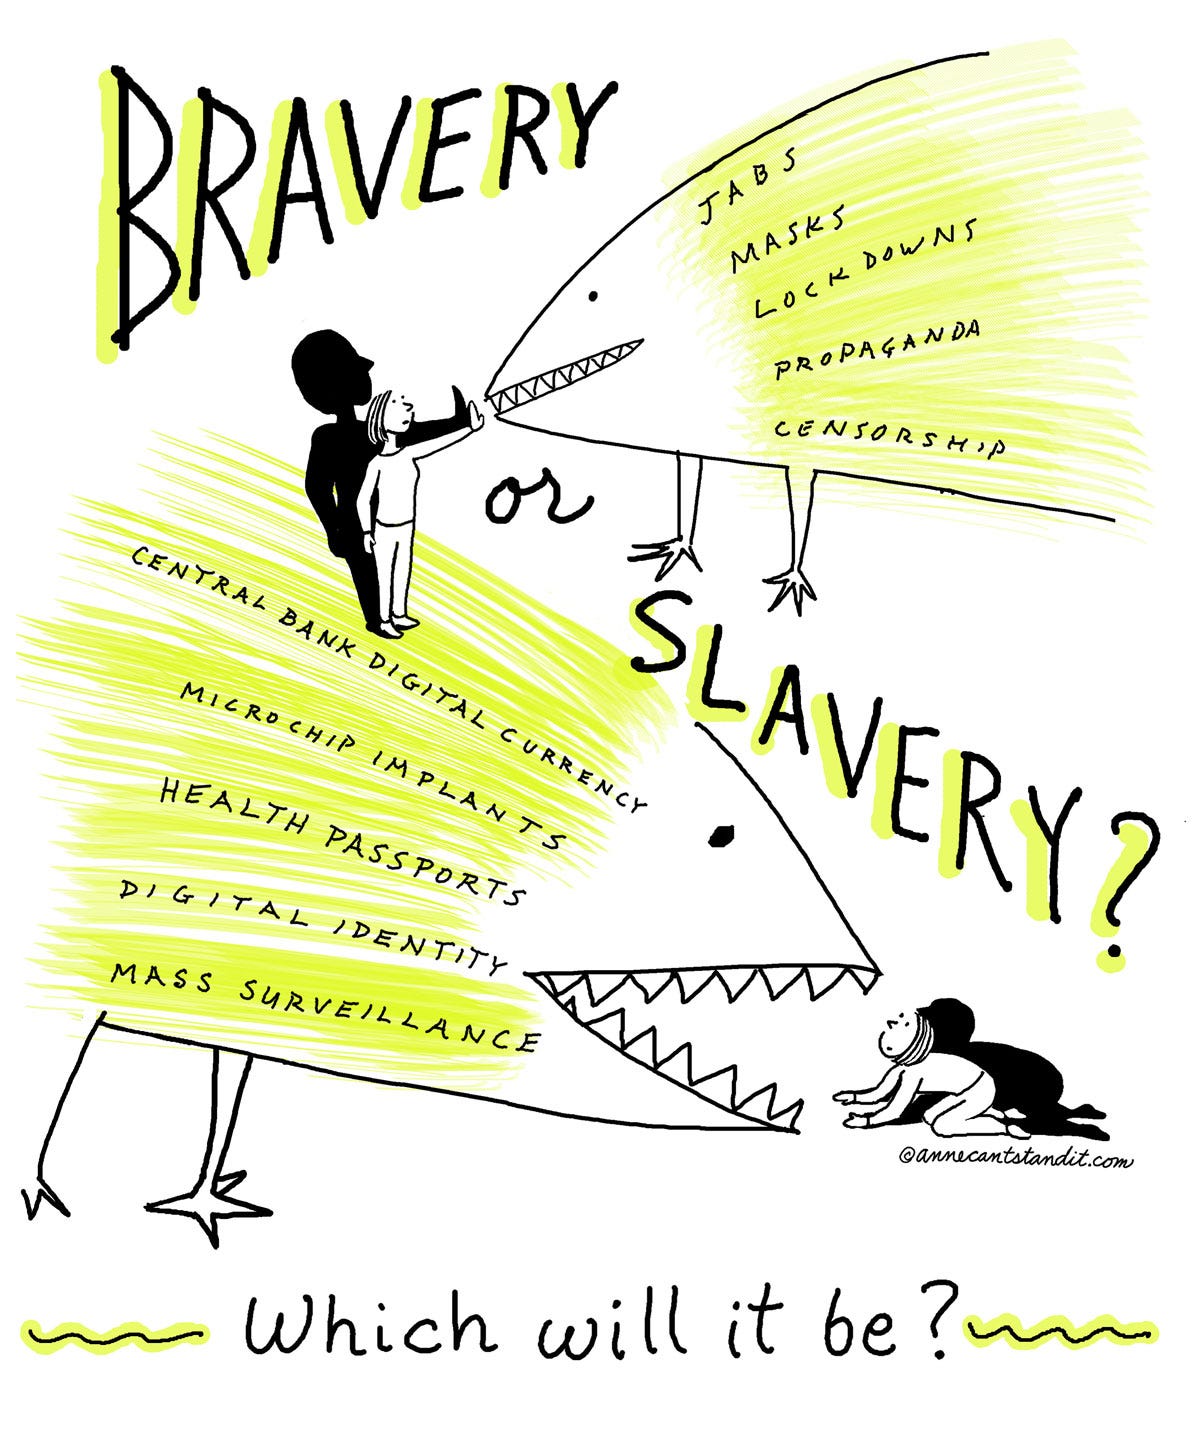 Bravery or Slavery? by Anne Gibbons of Anne Can't Stand It